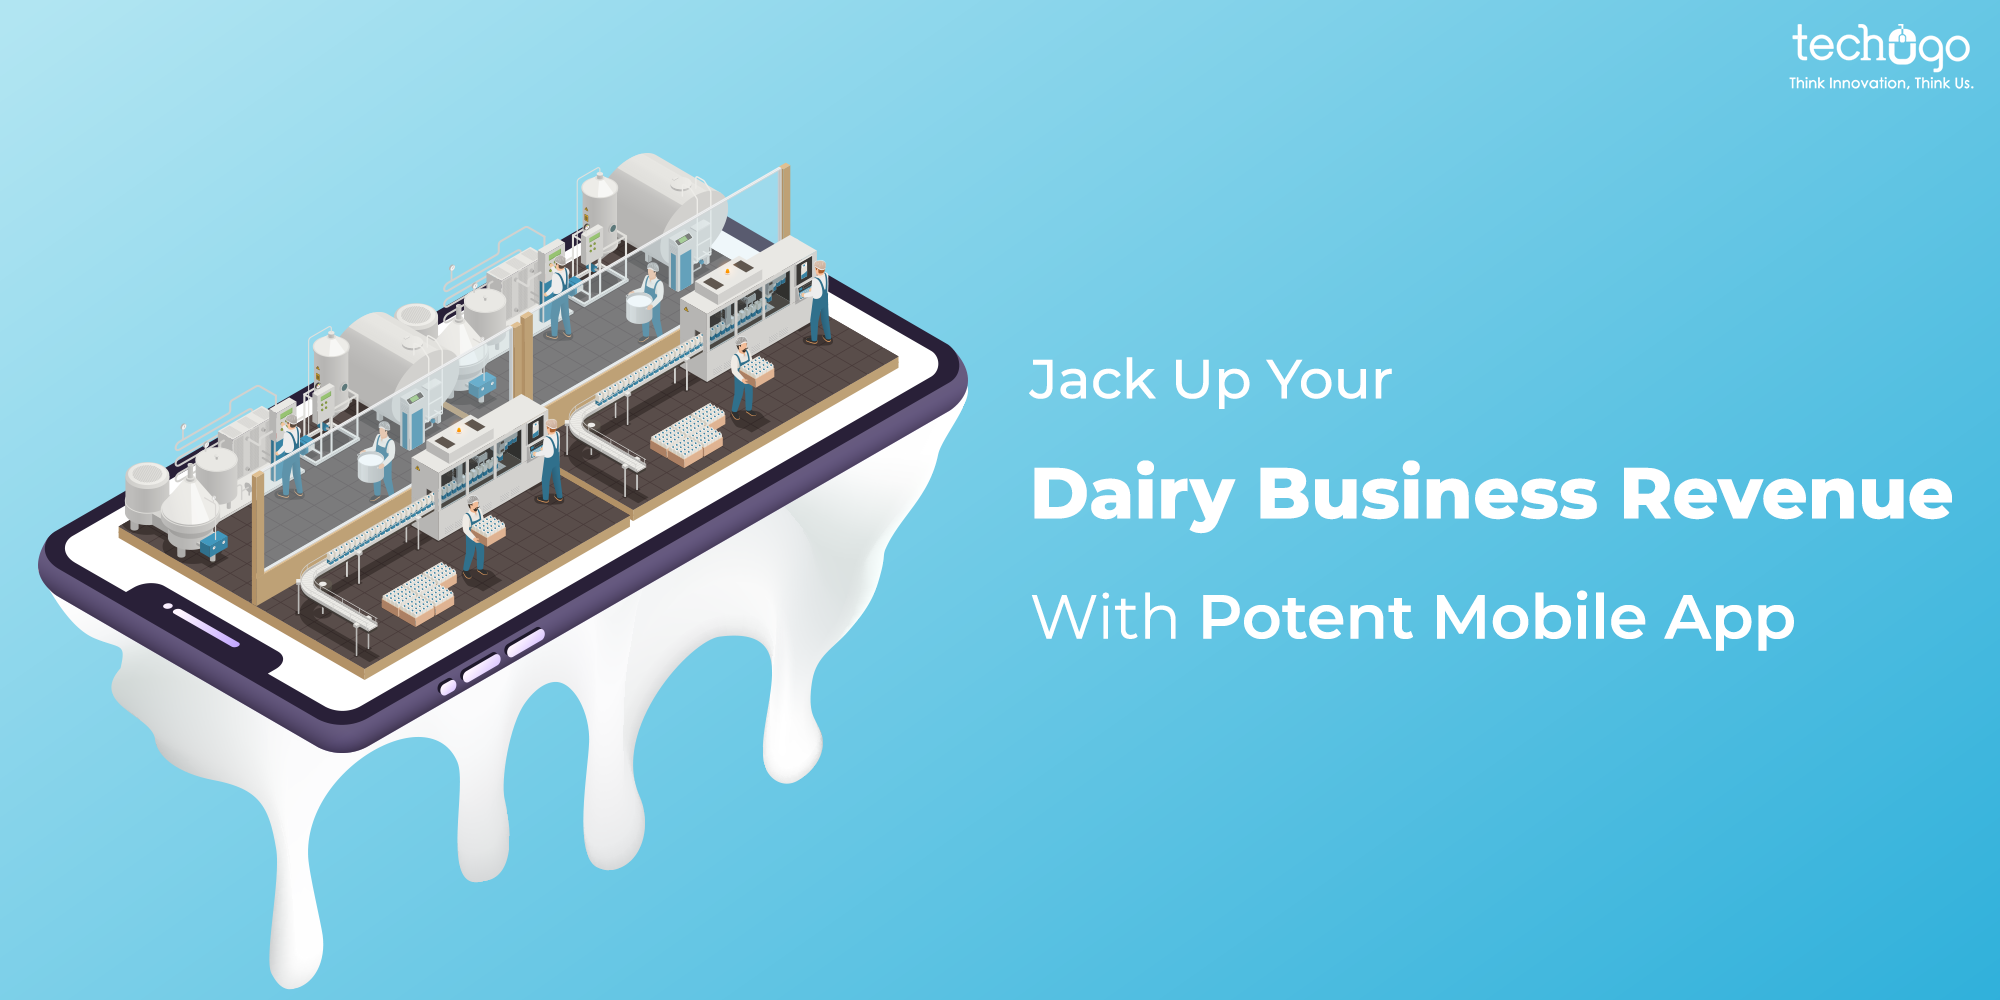 Uplift the revenue goal for your Dairy business